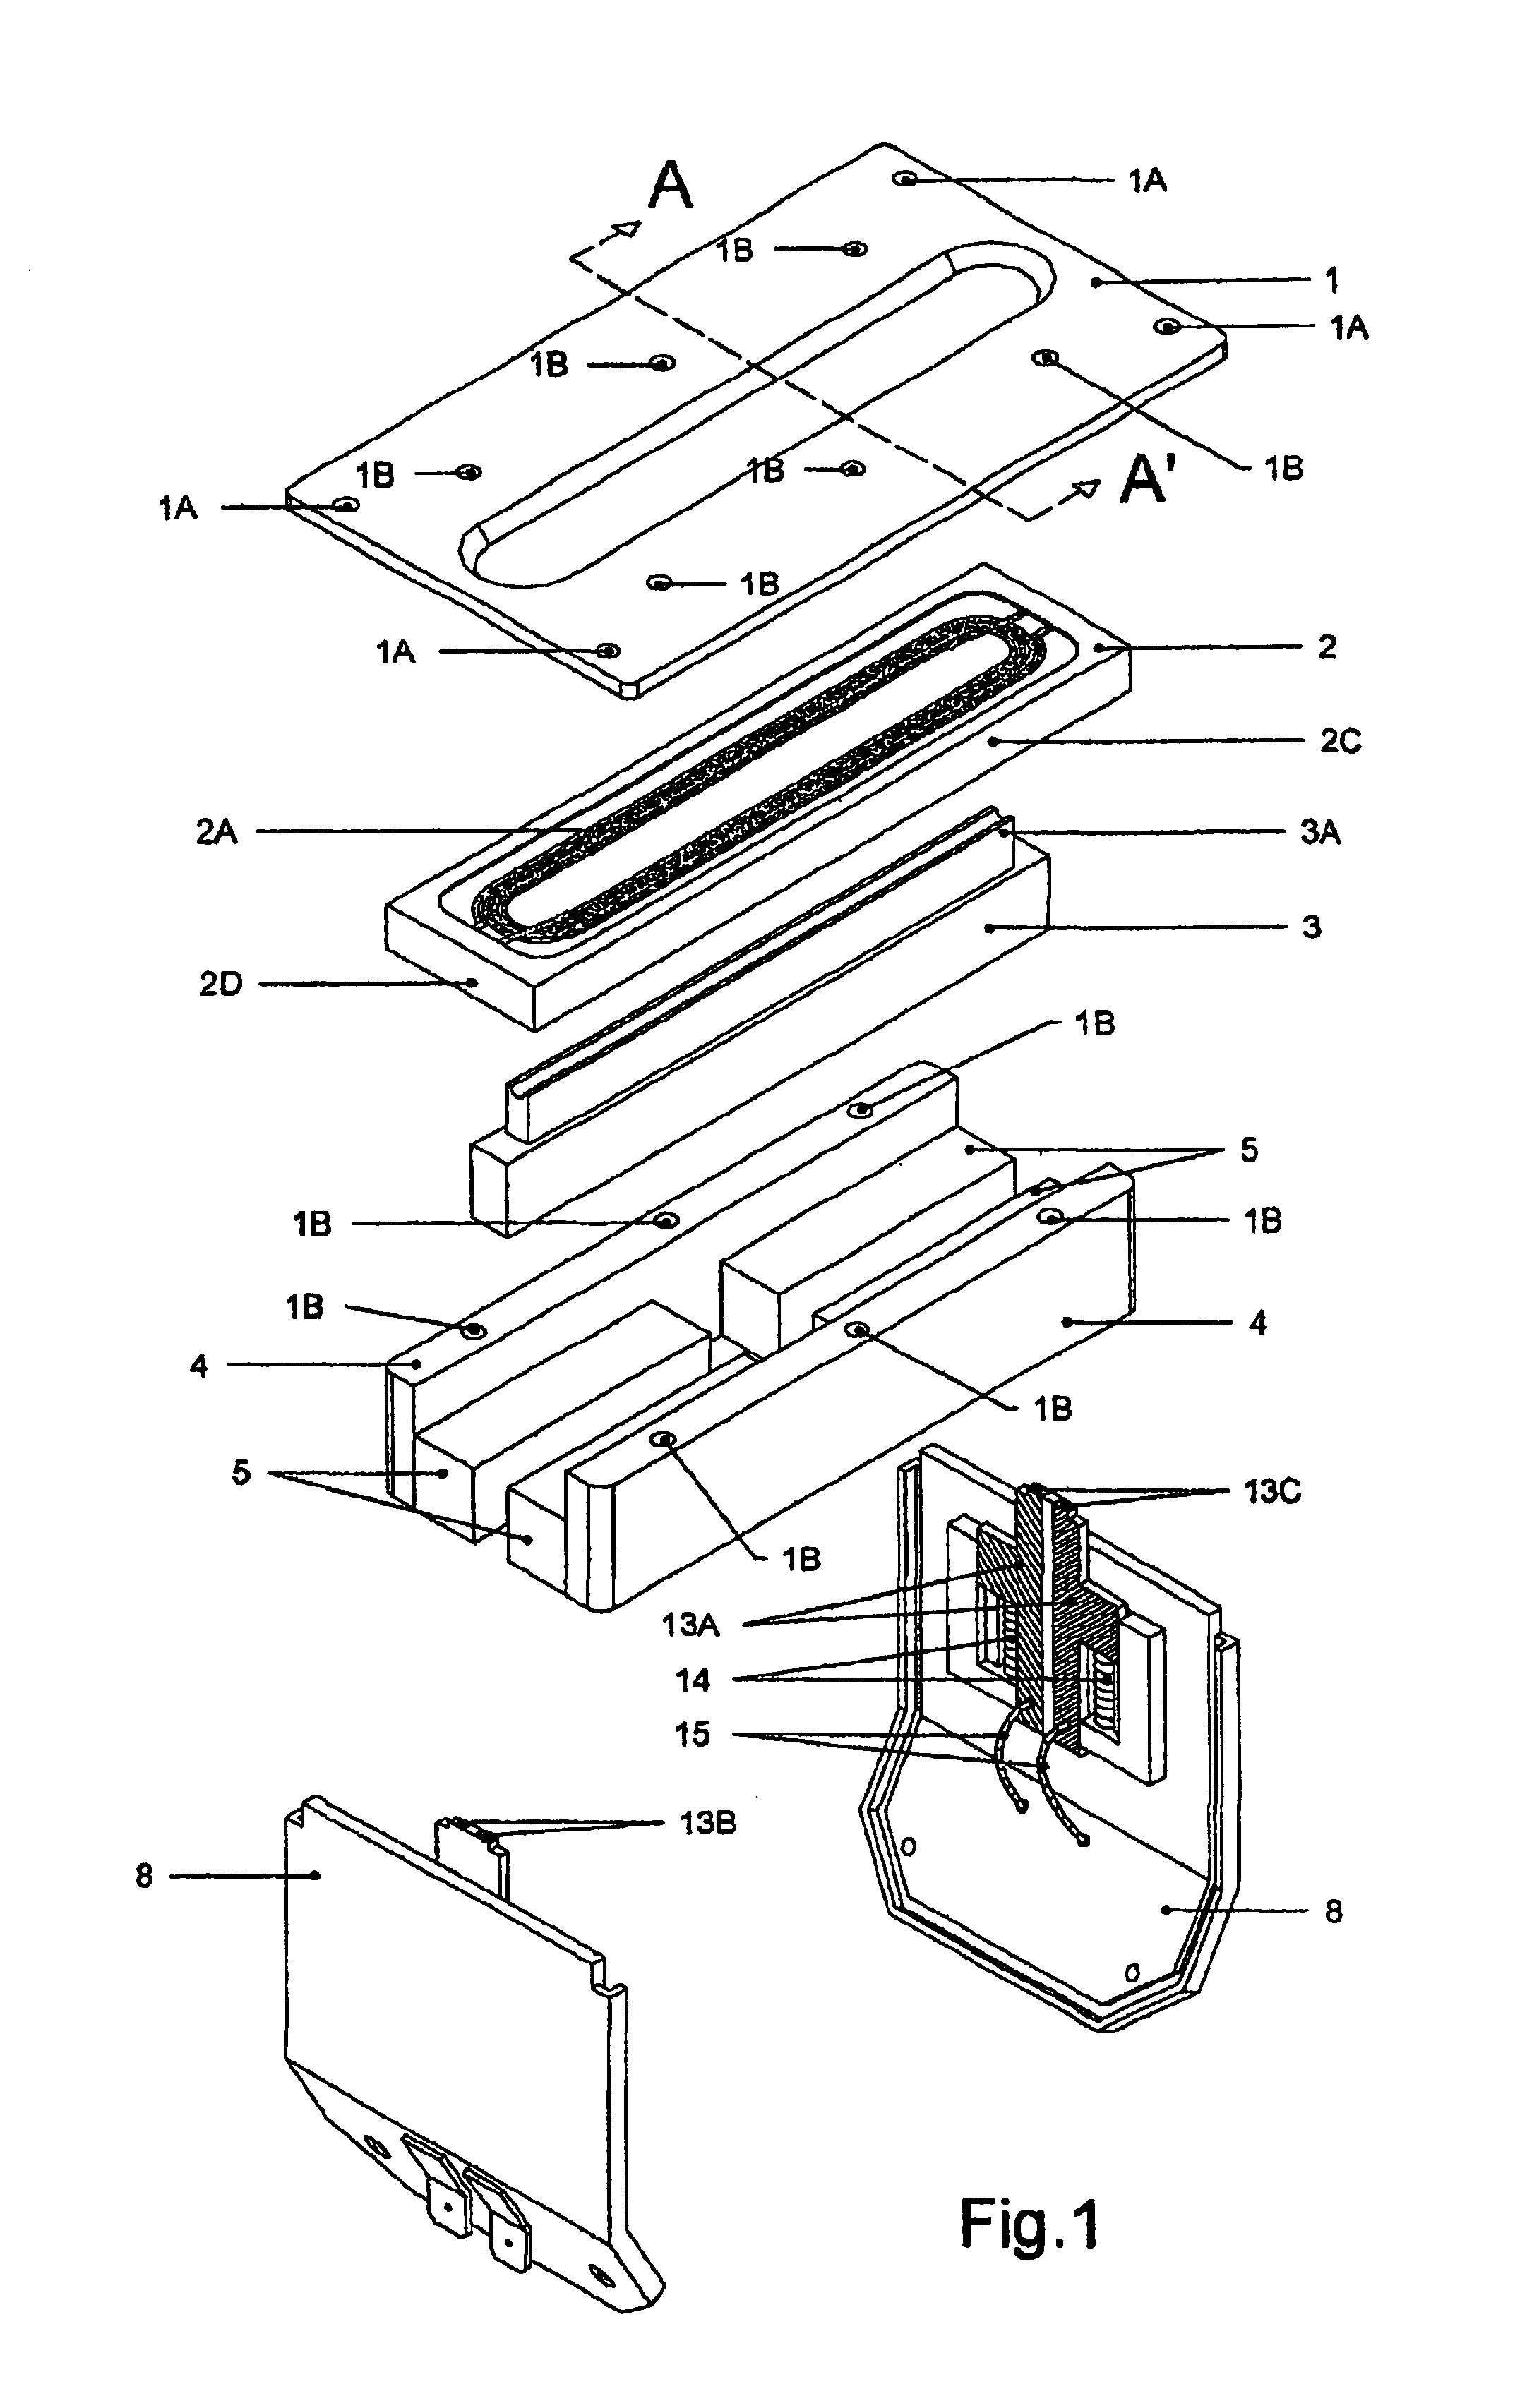 Electroacoustic transducer with field replaceable diaphragm carrying two interlaced coils, without manipulating any wires